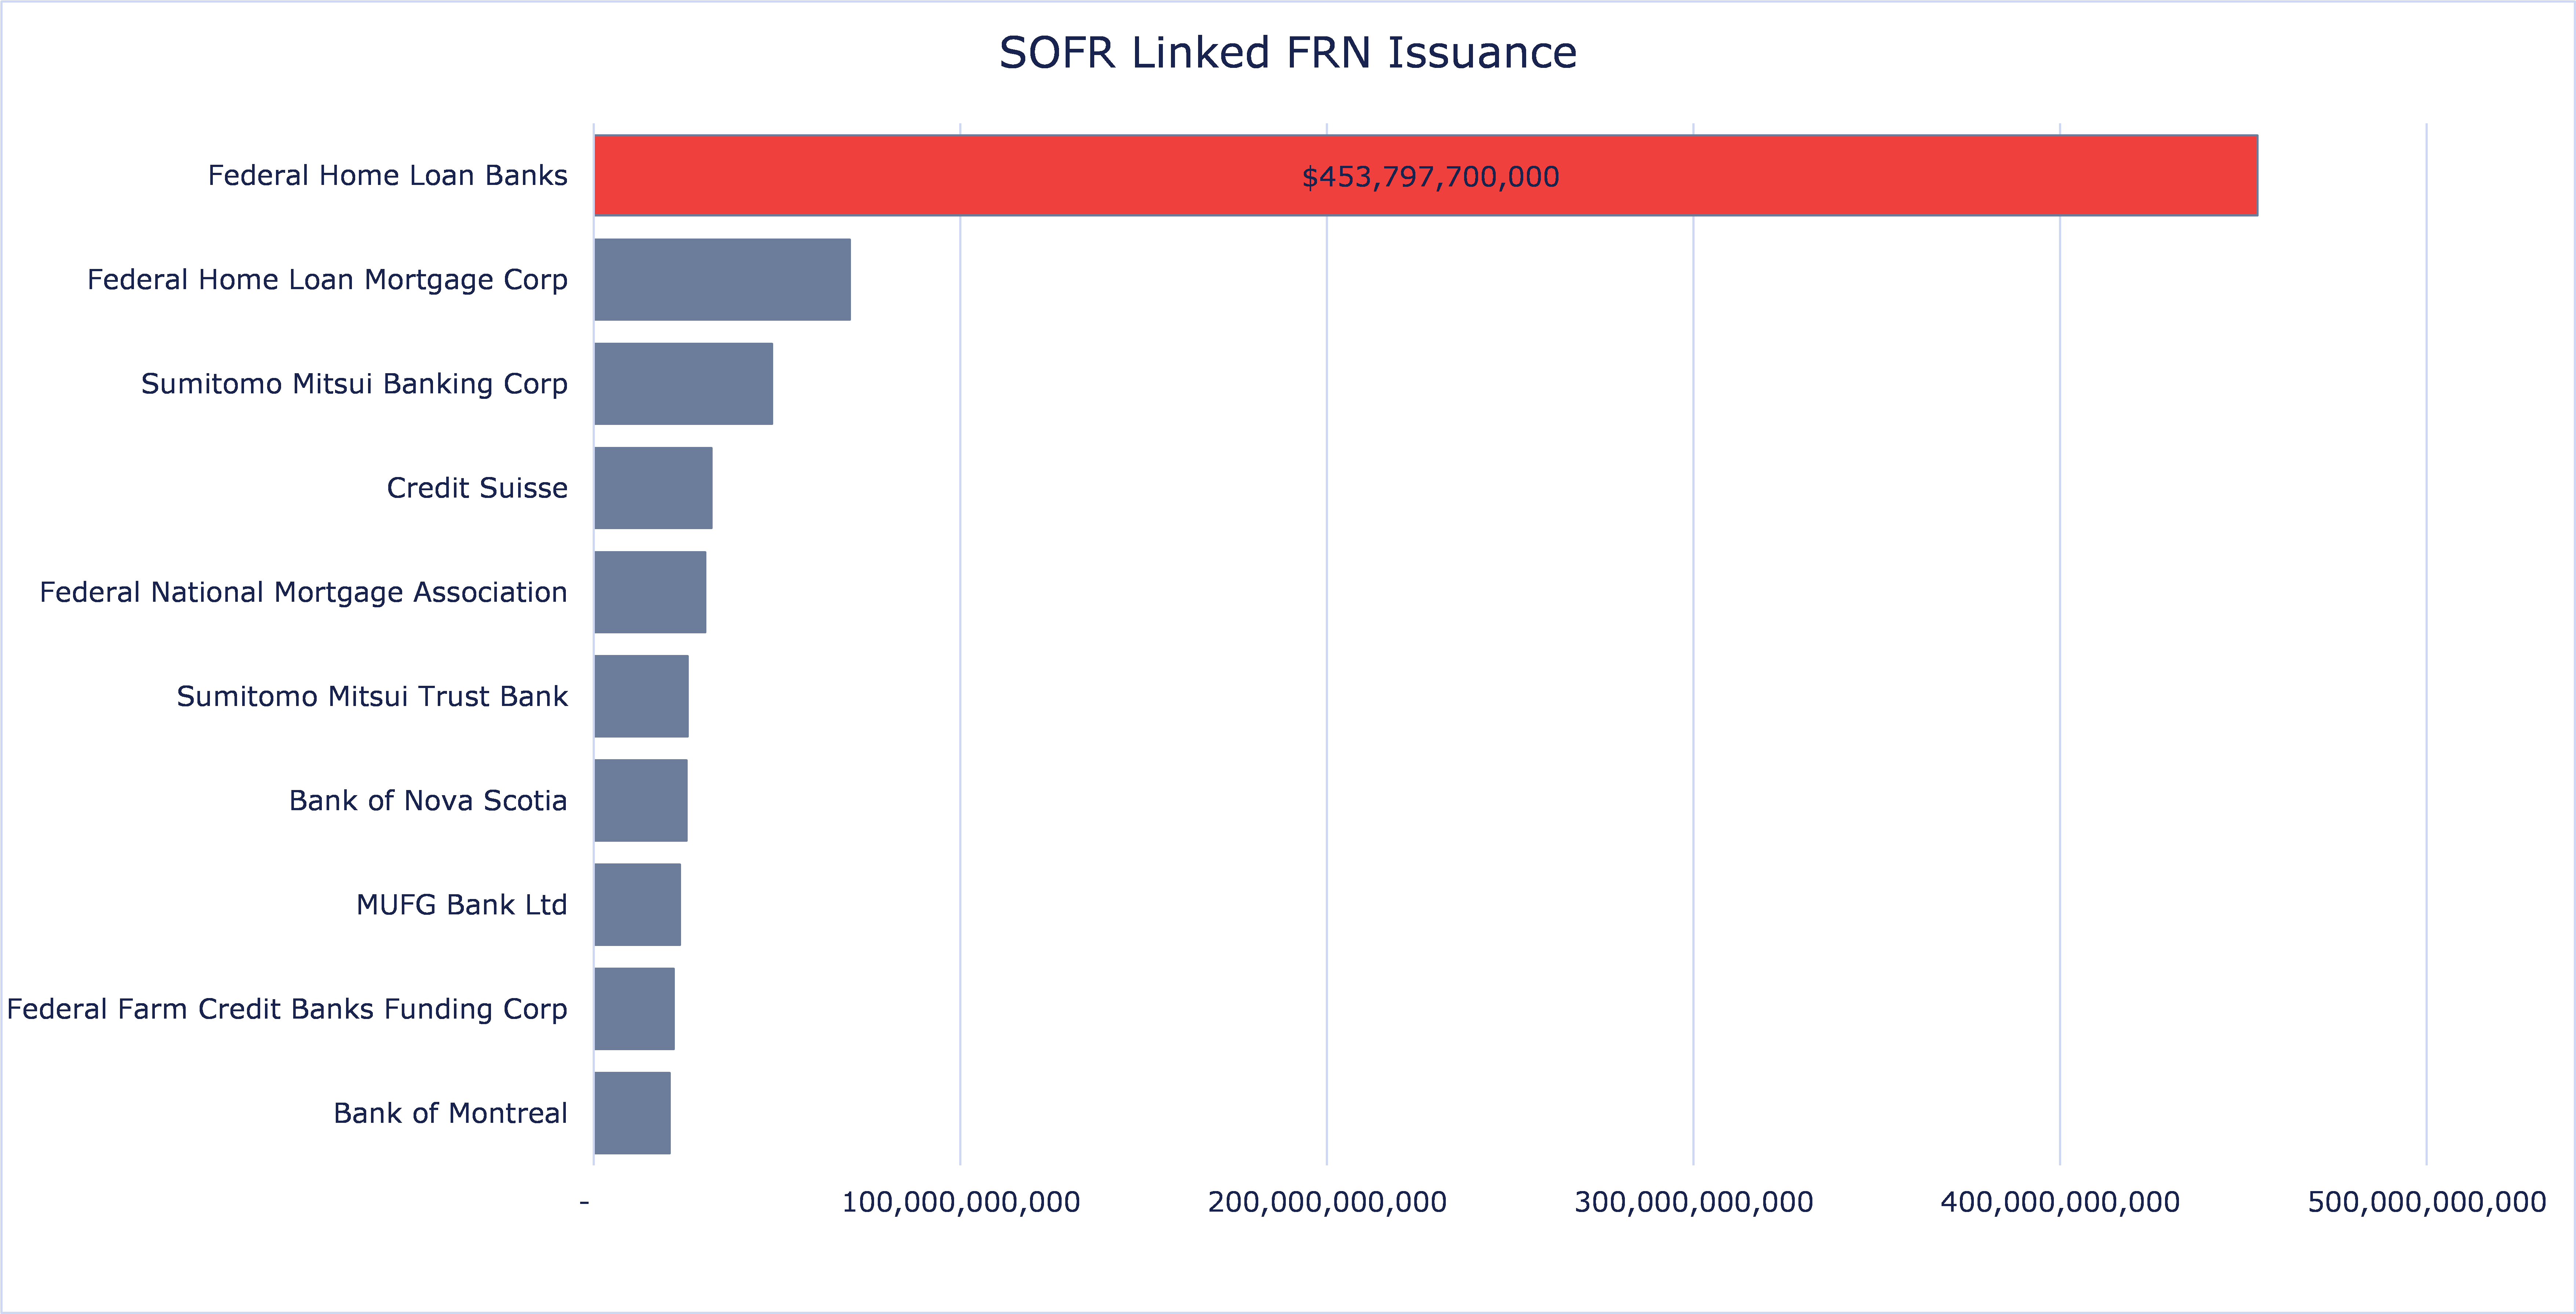 SOFR Linked FRN Issuance